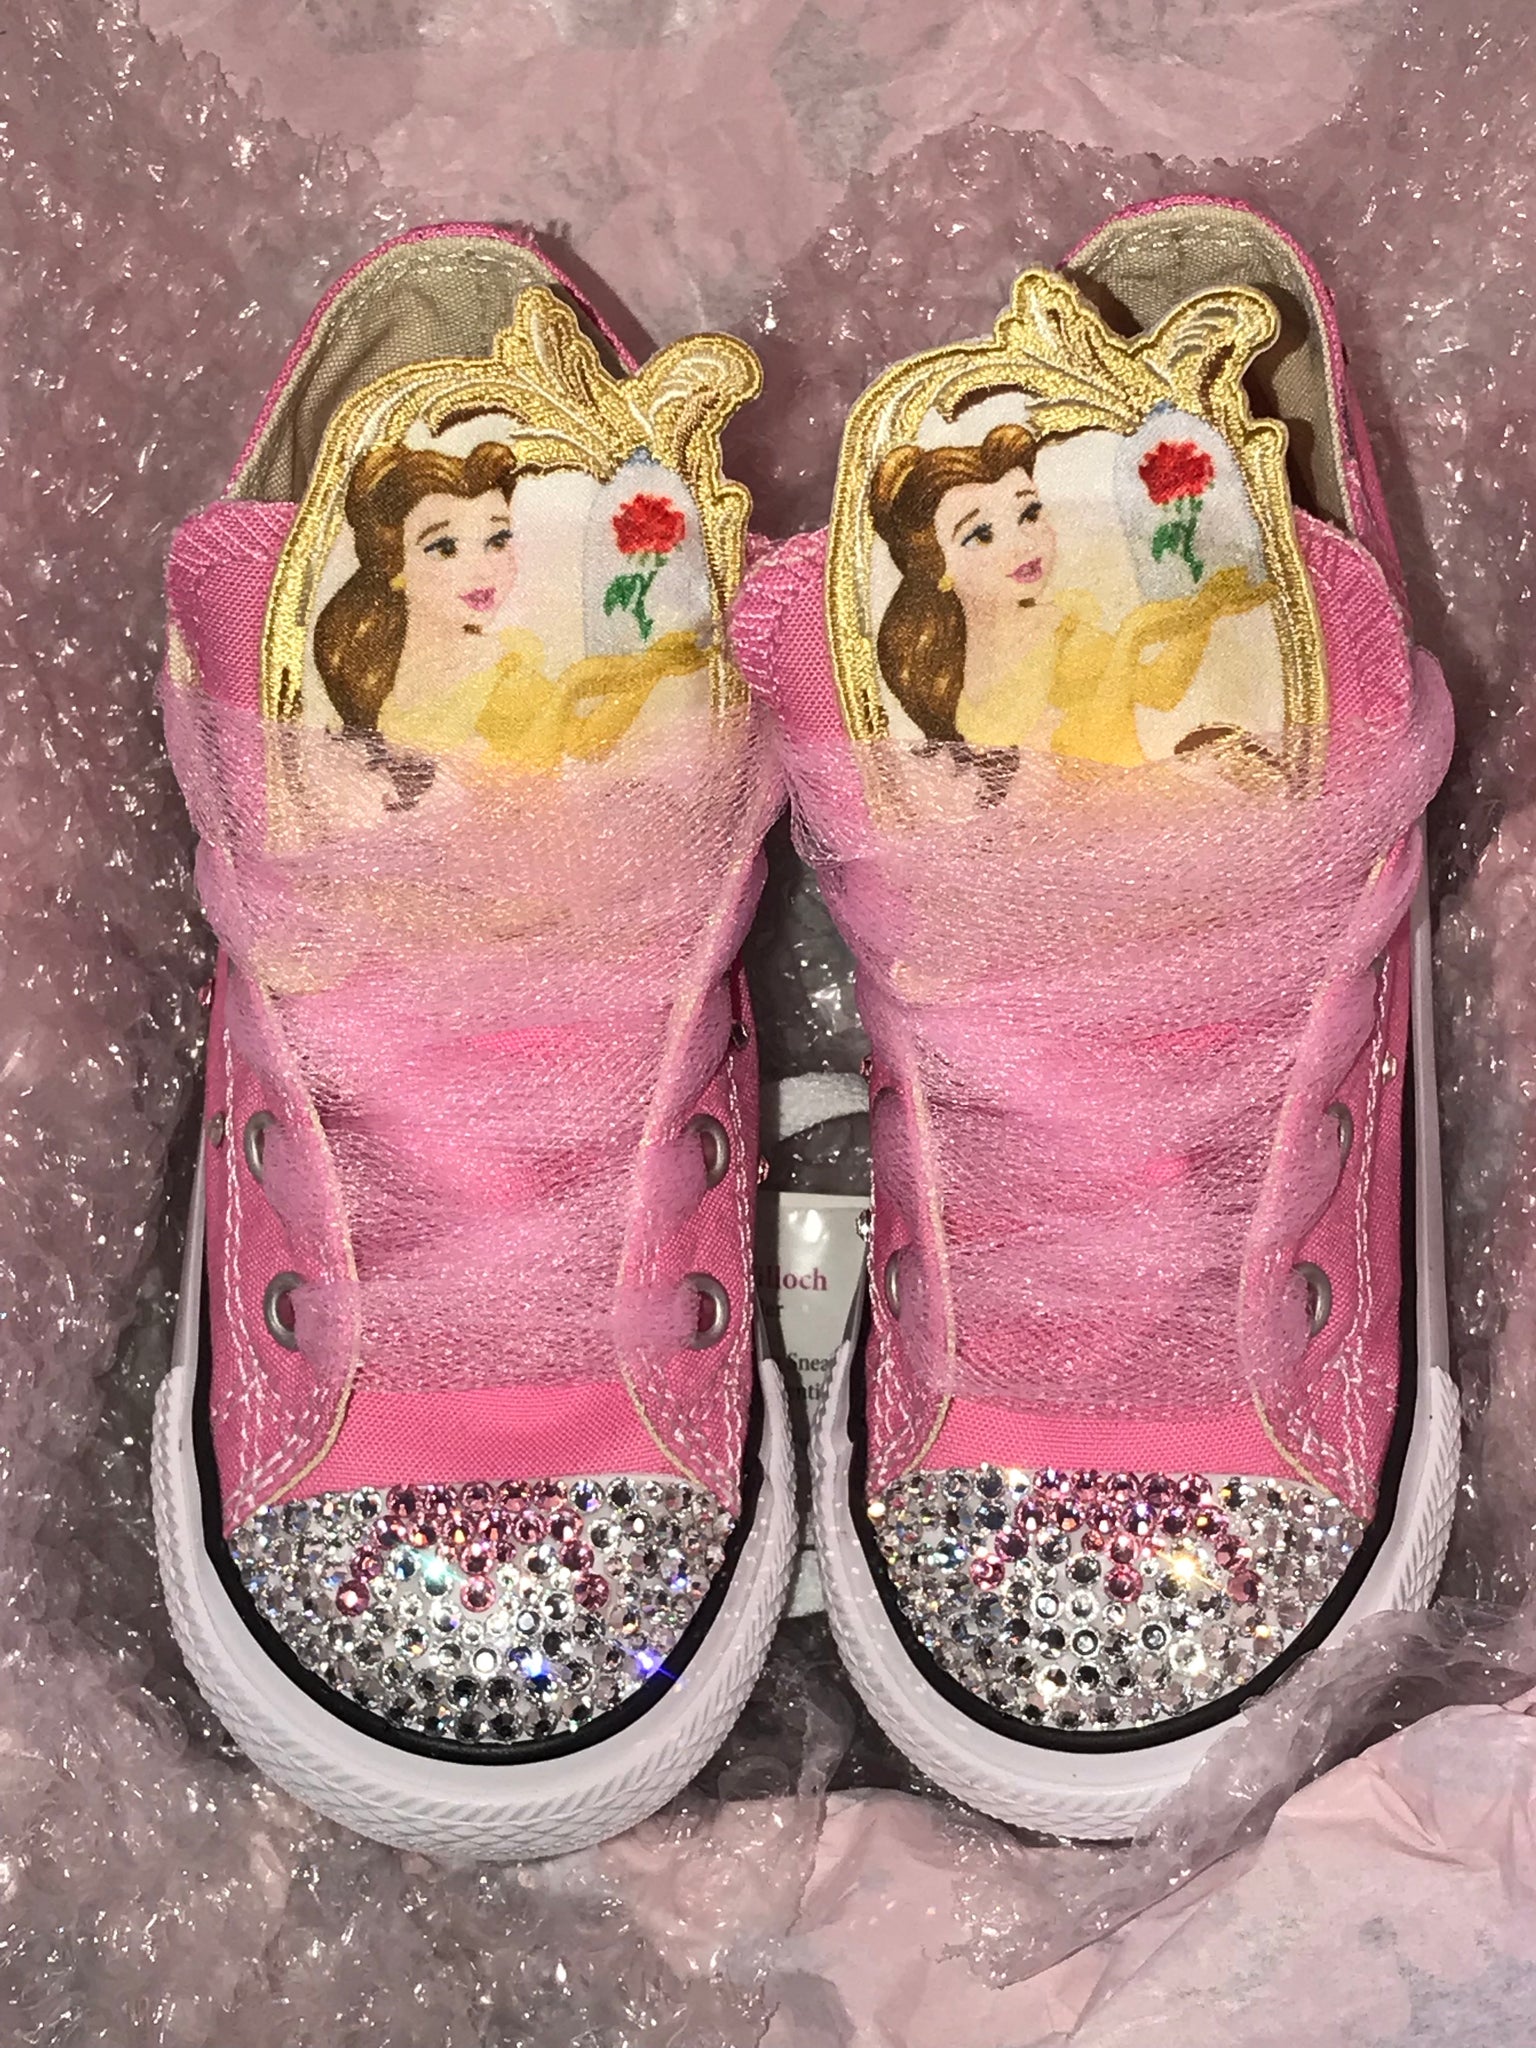 beauty and the beast converse shoes